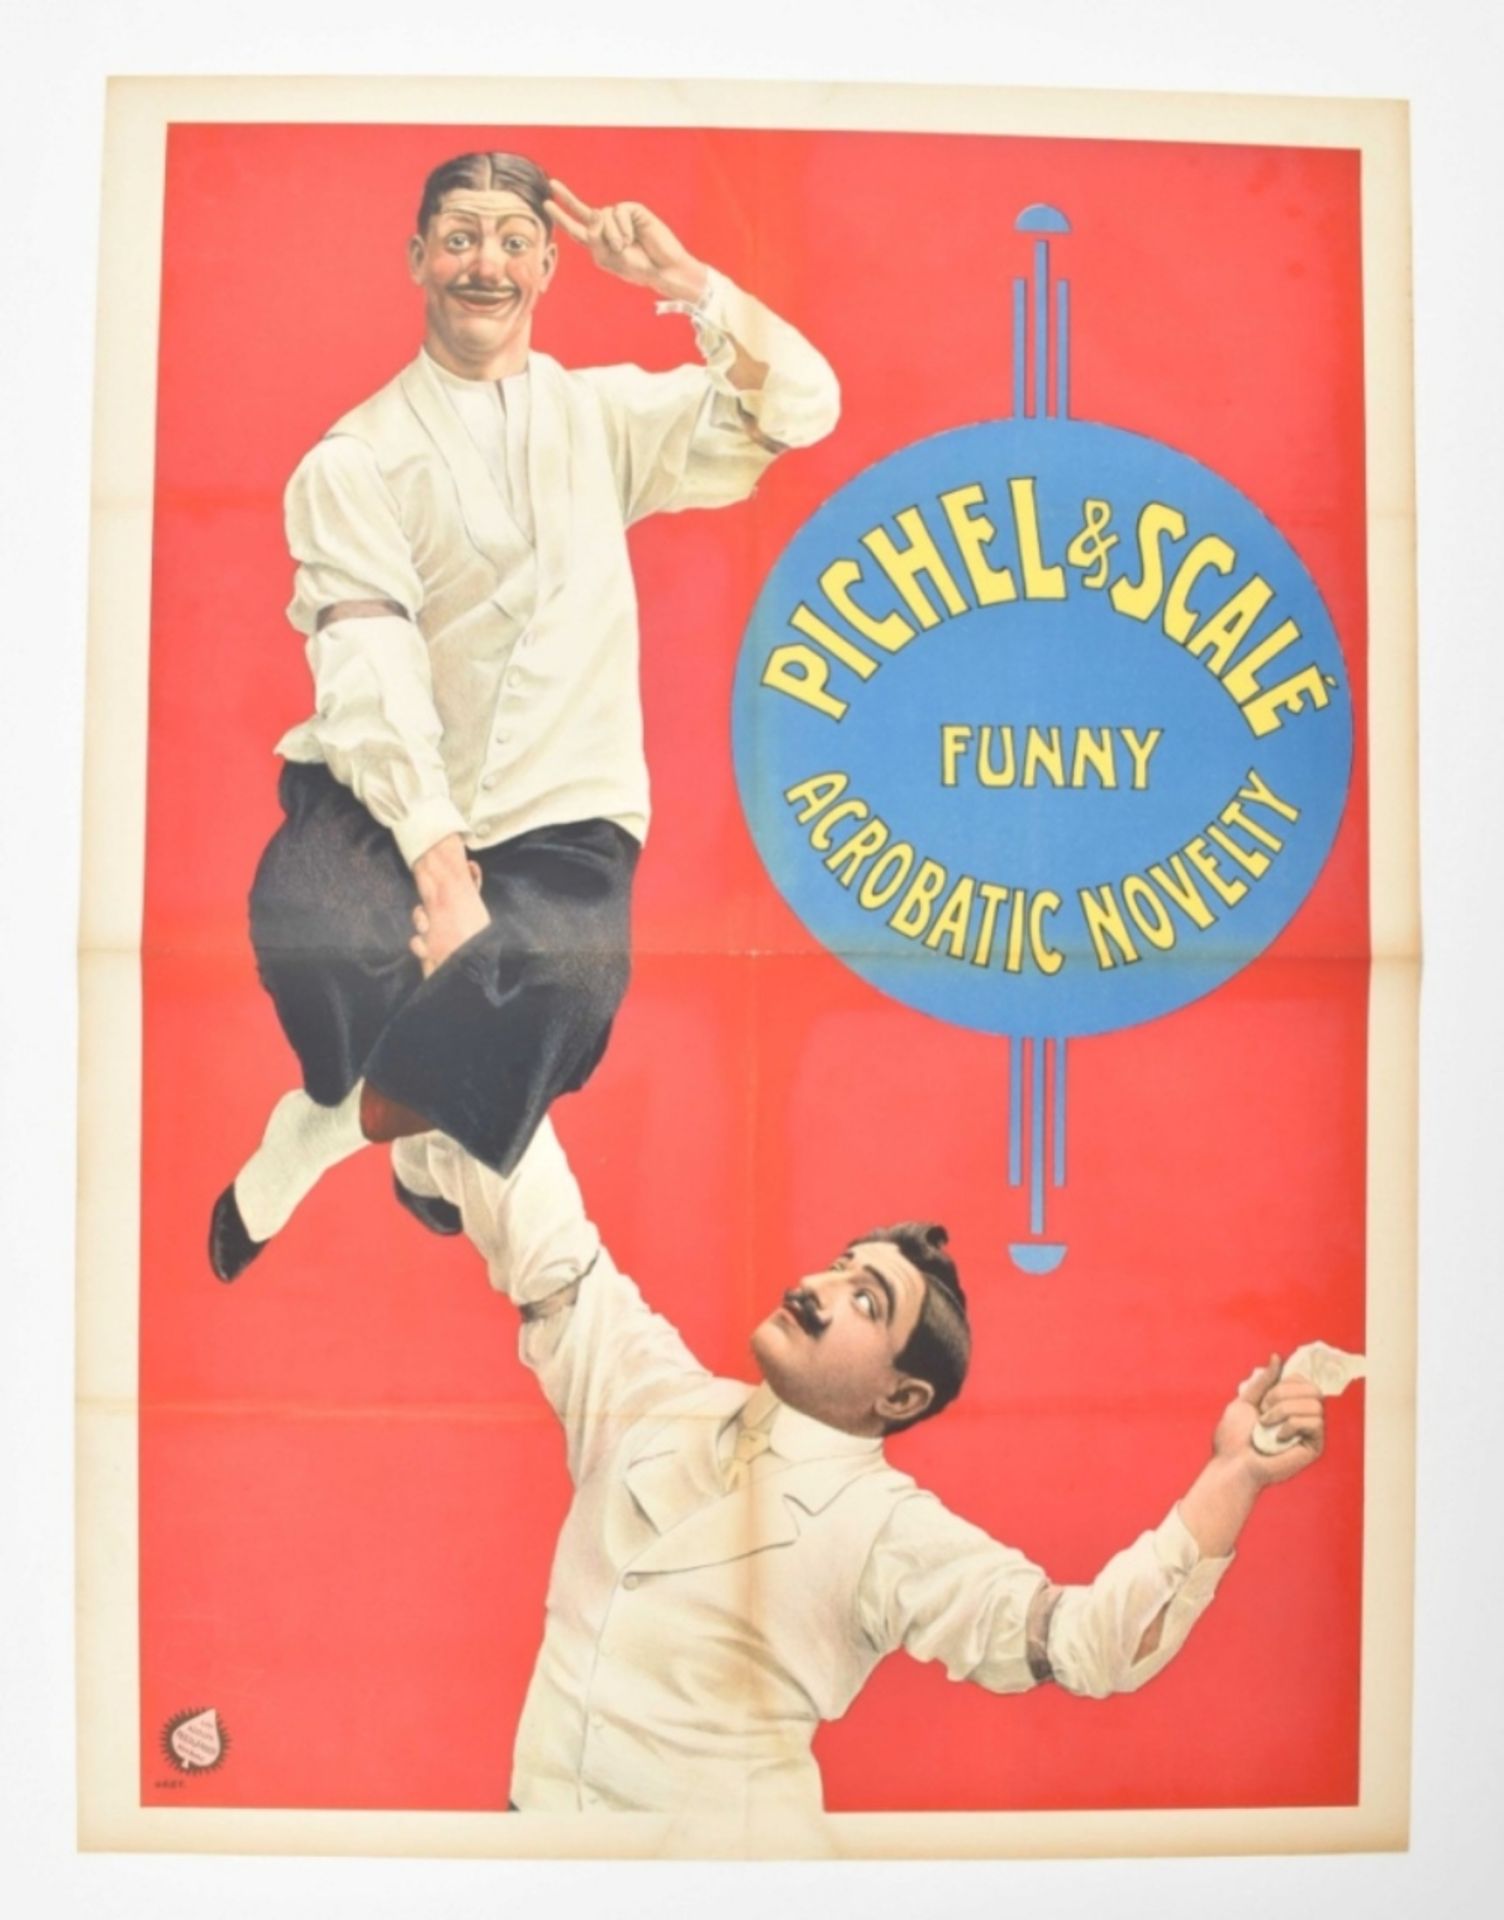 Pichel & Scalé, funny acrobatic novelty - Image 6 of 7